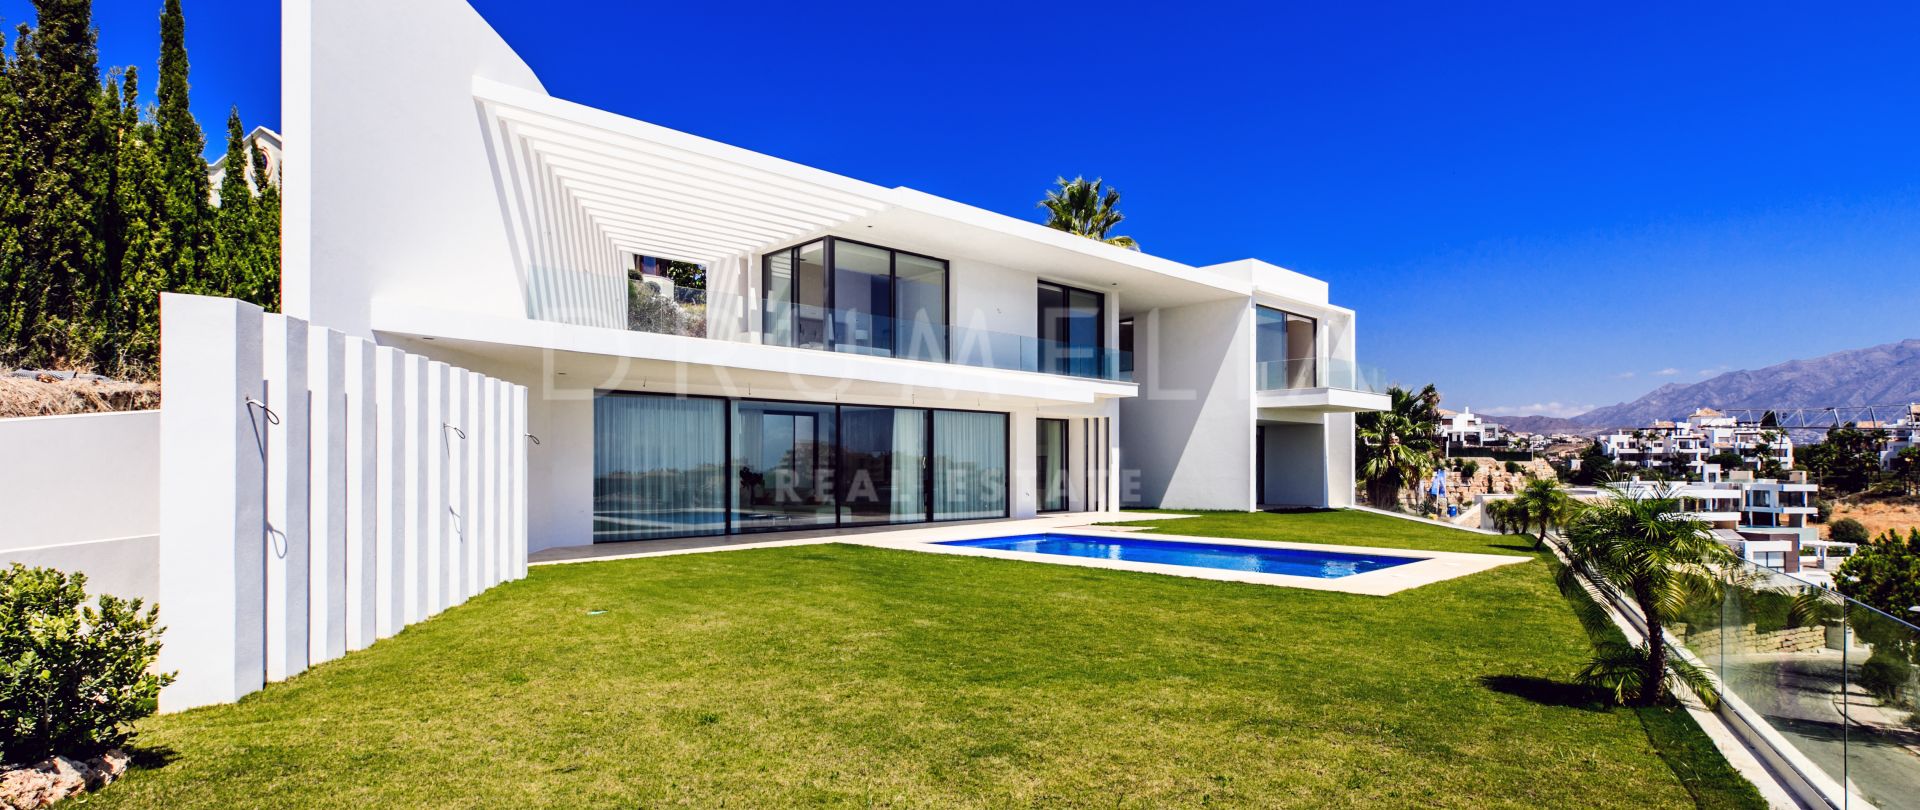 Imposing New Luxury House in High-tech Style in Capanes Sur